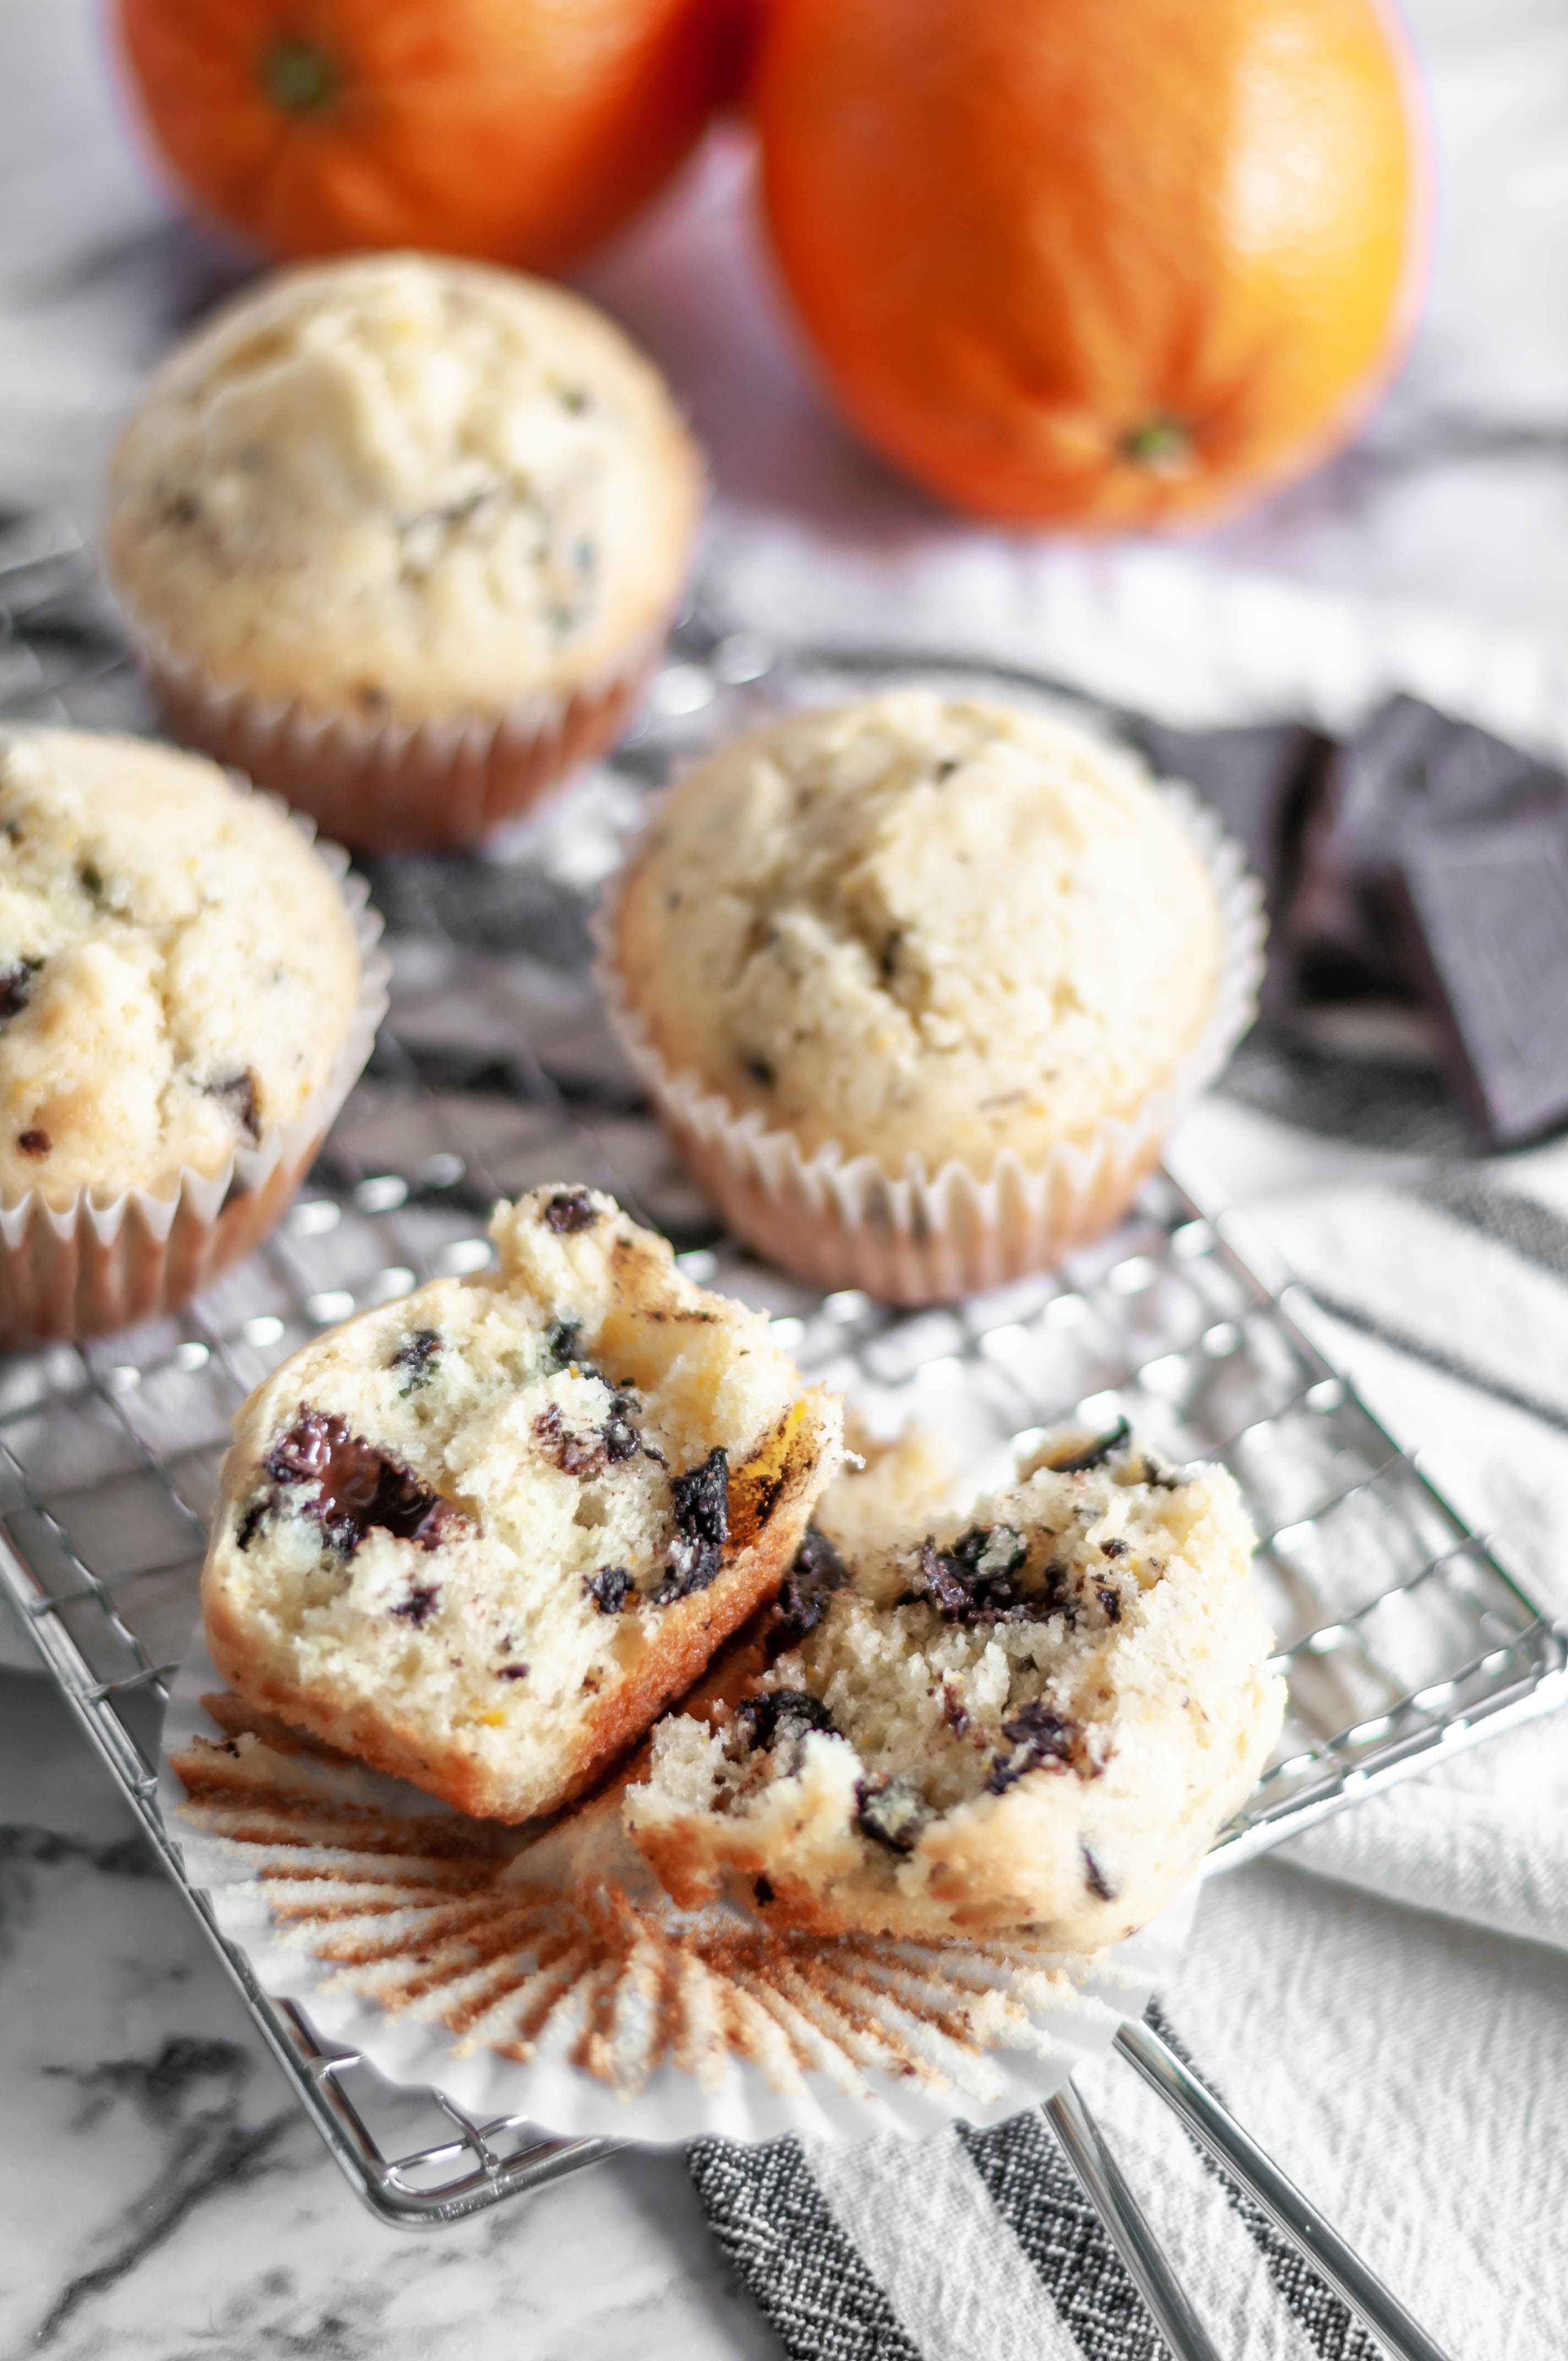 Orange Chocolate Chunk Muffins are light and easy to mix up. Dotted with dark chocolate chunks and sweet orange zest.